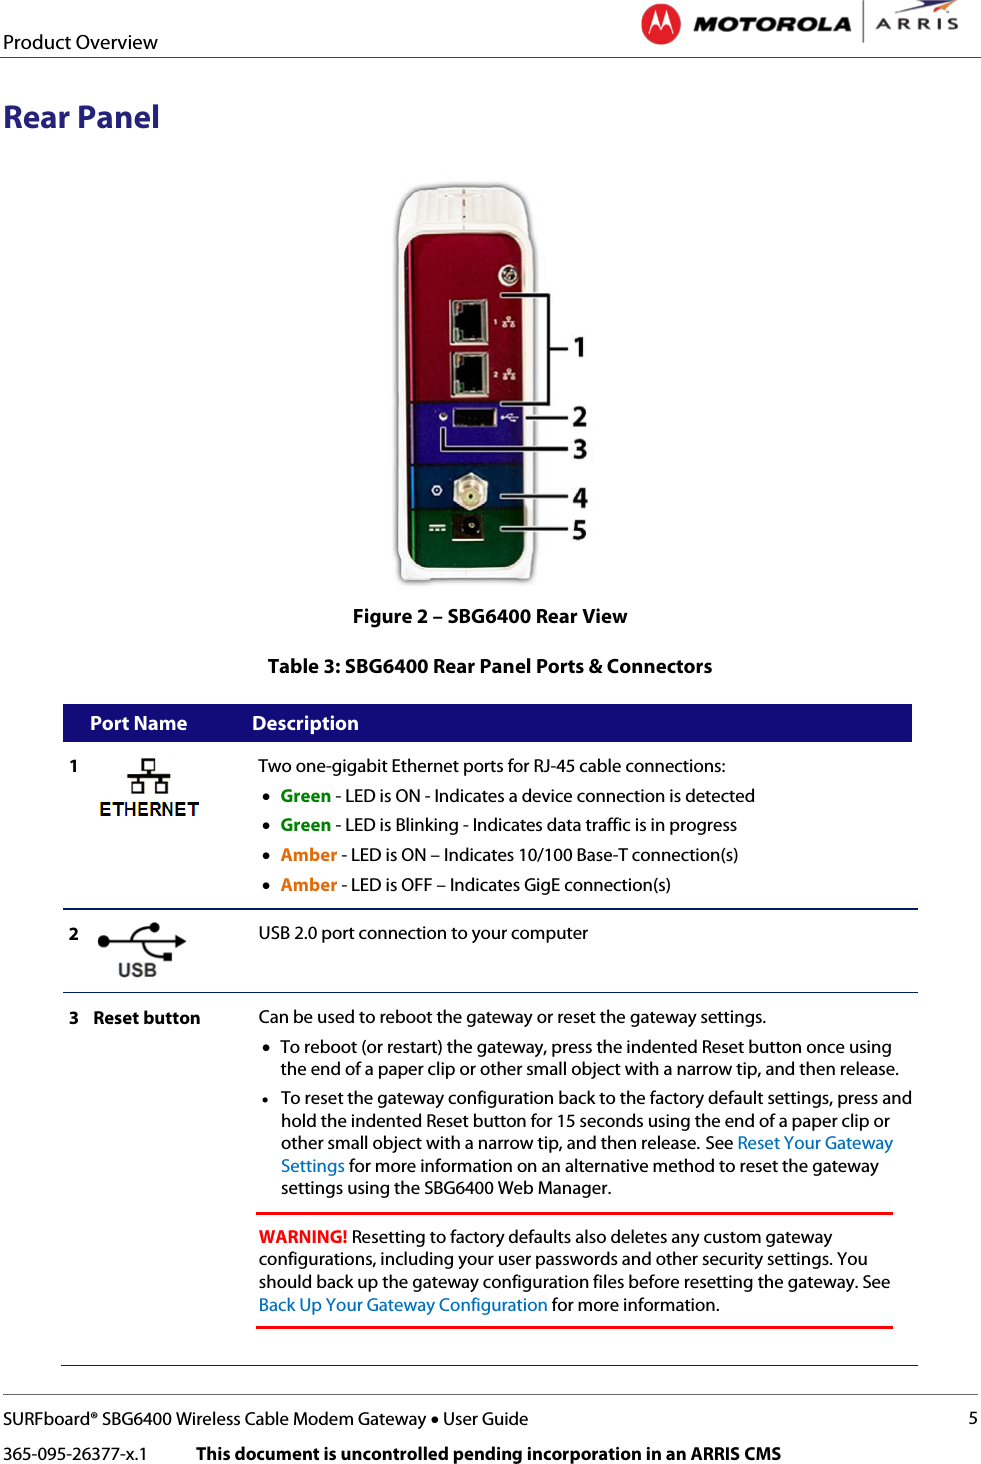 Product Overview   SURFboard® SBG6400 Wireless Cable Modem Gateway • User Guide 5 365-095-26377-x.1            This document is uncontrolled pending incorporation in an ARRIS CMS  Rear Panel  Figure 2 – SBG6400 Rear View Table 3: SBG6400 Rear Panel Ports &amp; Connectors      Port Name Description 1  Two one-gigabit Ethernet ports for RJ-45 cable connections: • Green - LED is ON - Indicates a device connection is detected  • Green - LED is Blinking - Indicates data traffic is in progress • Amber - LED is ON – Indicates 10/100 Base-T connection(s) • Amber - LED is OFF – Indicates GigE connection(s) 2  USB 2.0 port connection to your computer 3 Reset button Can be used to reboot the gateway or reset the gateway settings.  • To reboot (or restart) the gateway, press the indented Reset button once using the end of a paper clip or other small object with a narrow tip, and then release. • To reset the gateway configuration back to the factory default settings, press and hold the indented Reset button for 15 seconds using the end of a paper clip or other small object with a narrow tip, and then release. See Reset Your Gateway Settings for more information on an alternative method to reset the gateway settings using the SBG6400 Web Manager.  WARNING! Resetting to factory defaults also deletes any custom gateway configurations, including your user passwords and other security settings. You should back up the gateway configuration files before resetting the gateway. See Back Up Your Gateway Configuration for more information.   